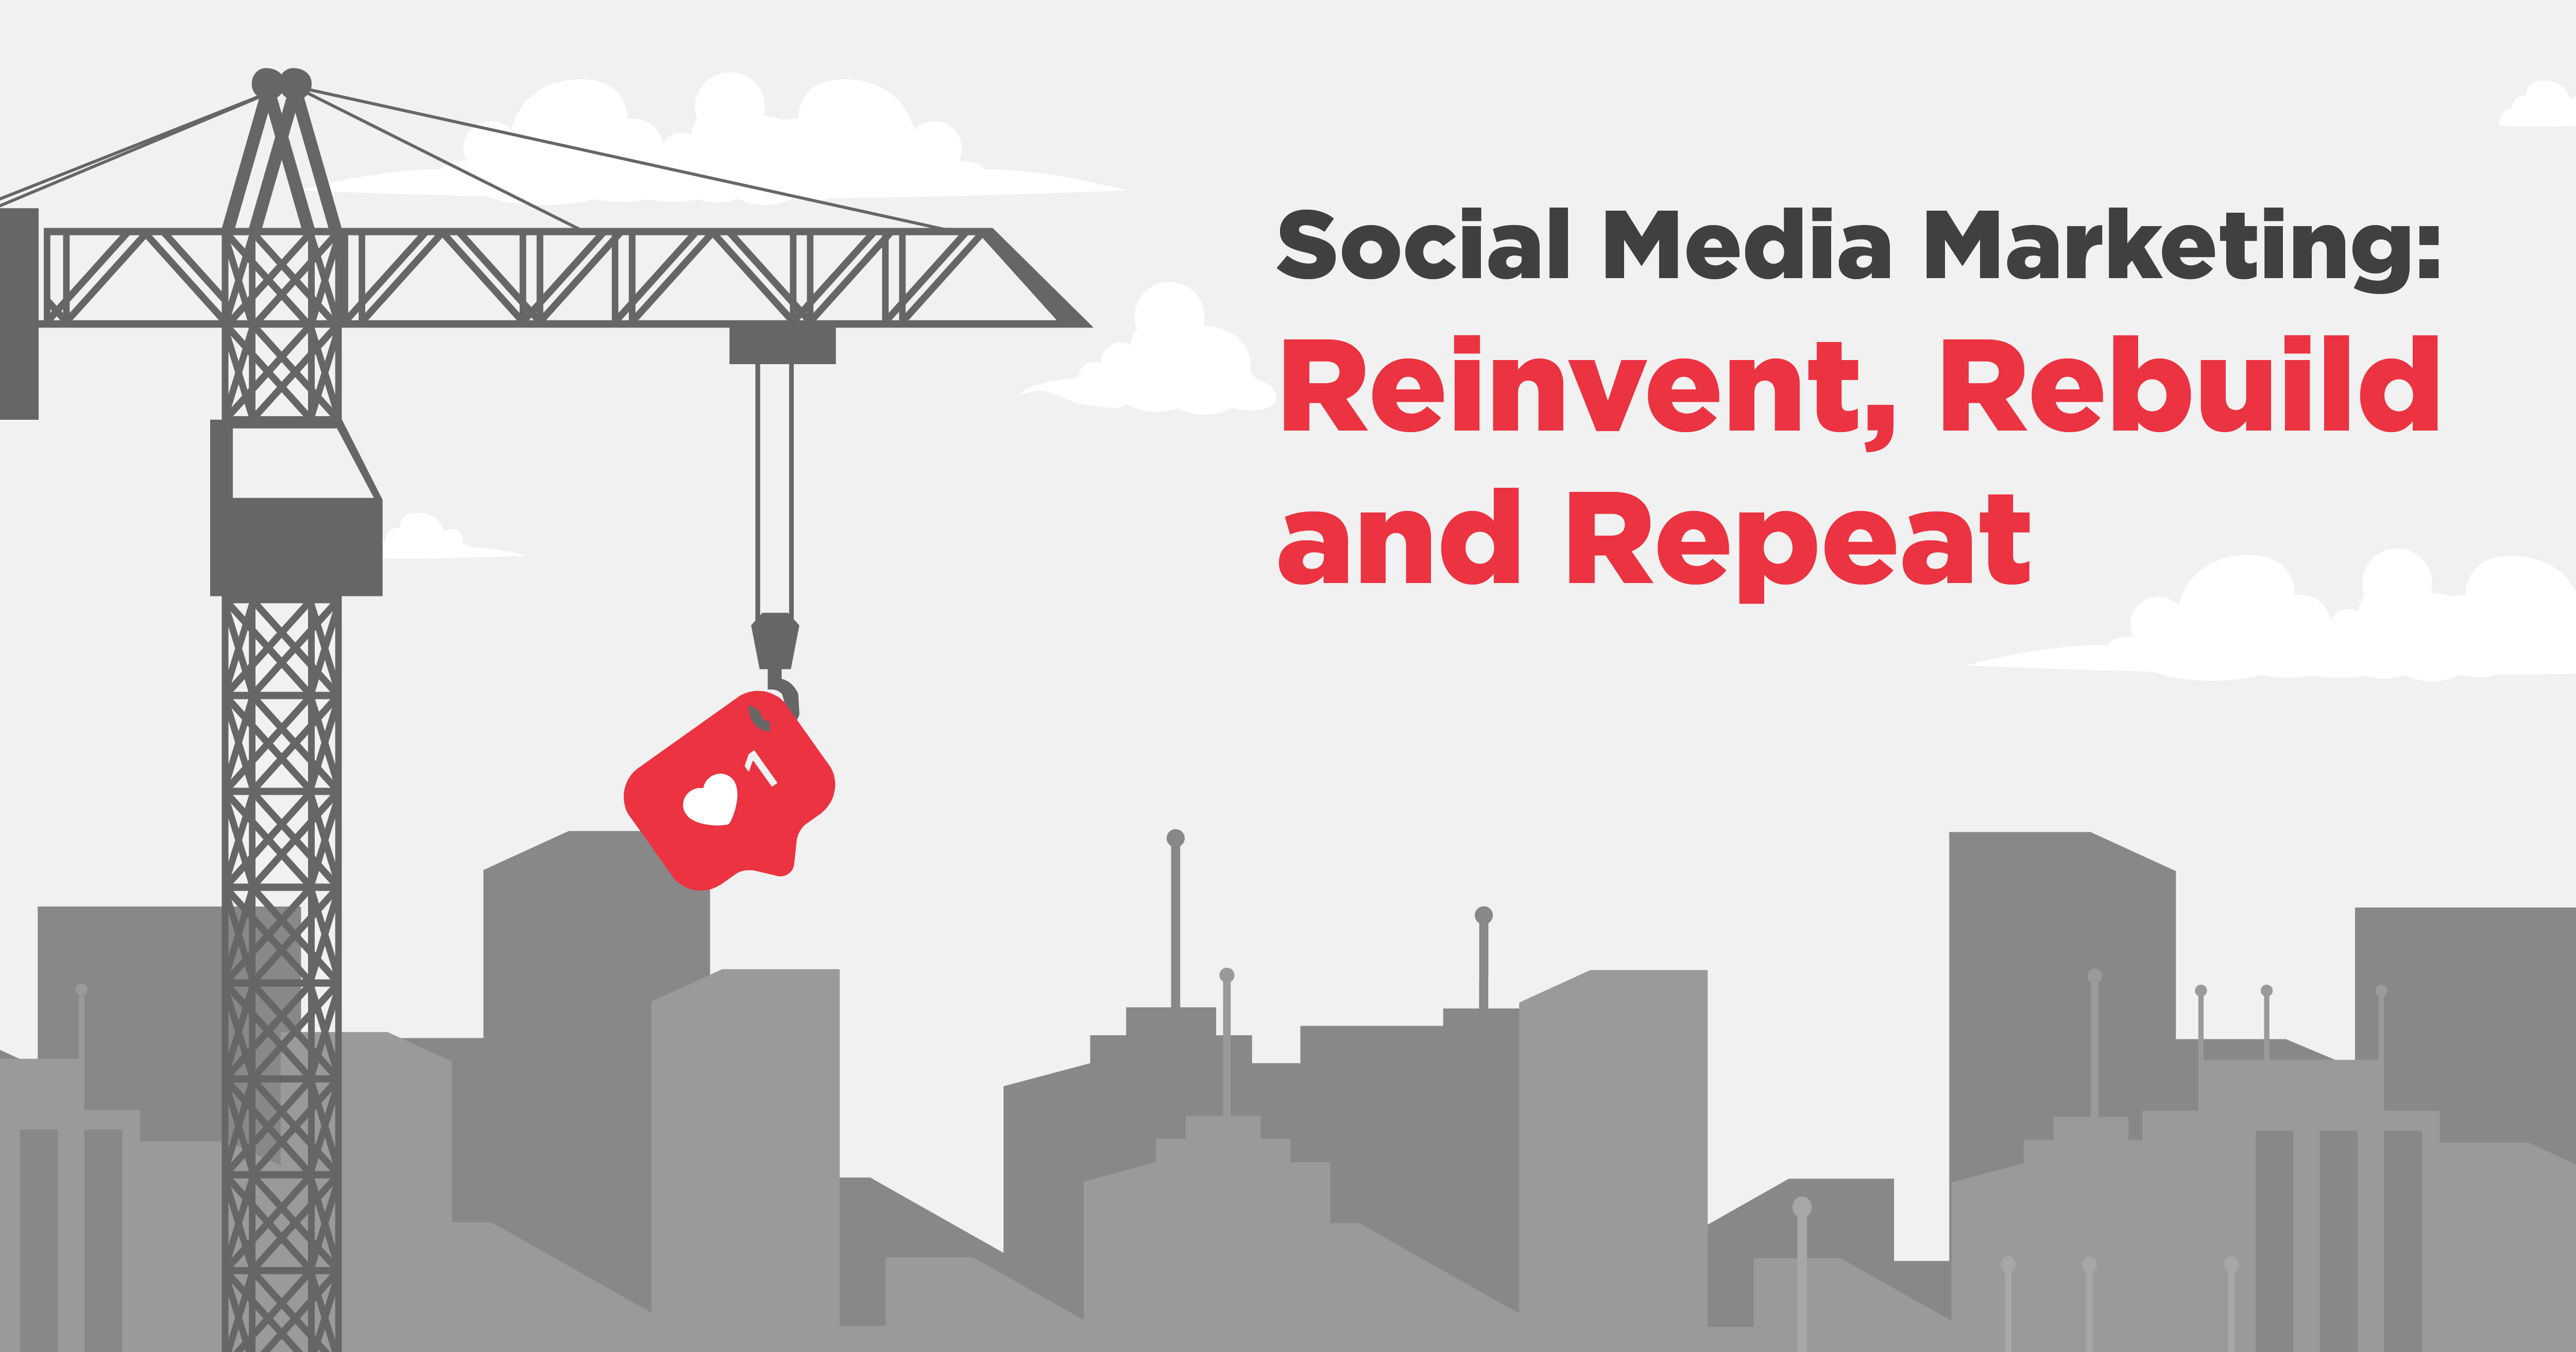 A city skyline with a crane lifting an Instagram notification with the text "Social Media Marketing: Reinvent, Rebuild, and Repeat" - Social Media Marketing